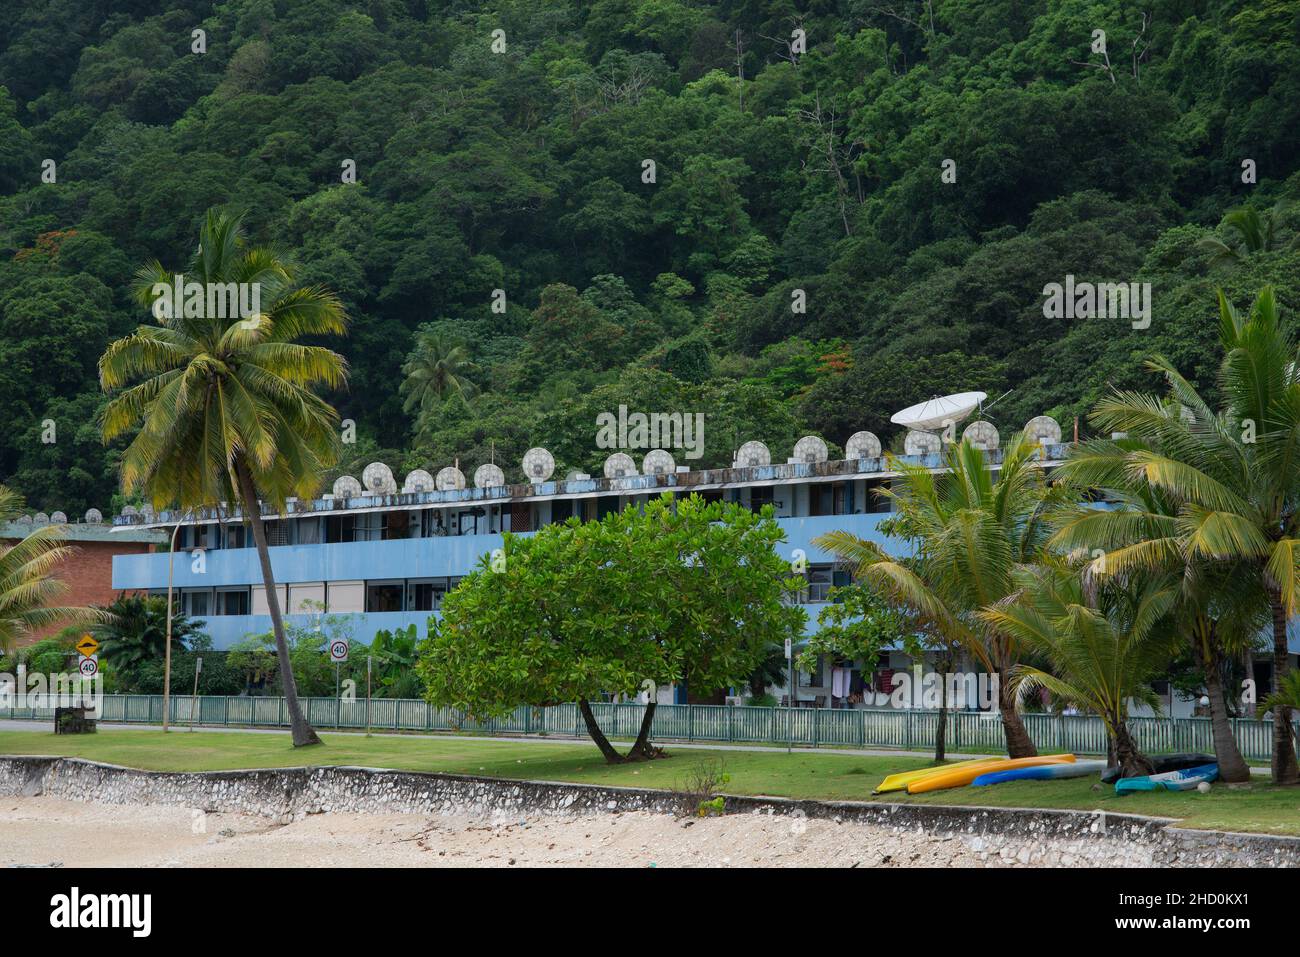 Satellite dishes adorn the roof of an apartment building in the kompongs of Flying Fish Cove on Christmas Island. Stock Photo